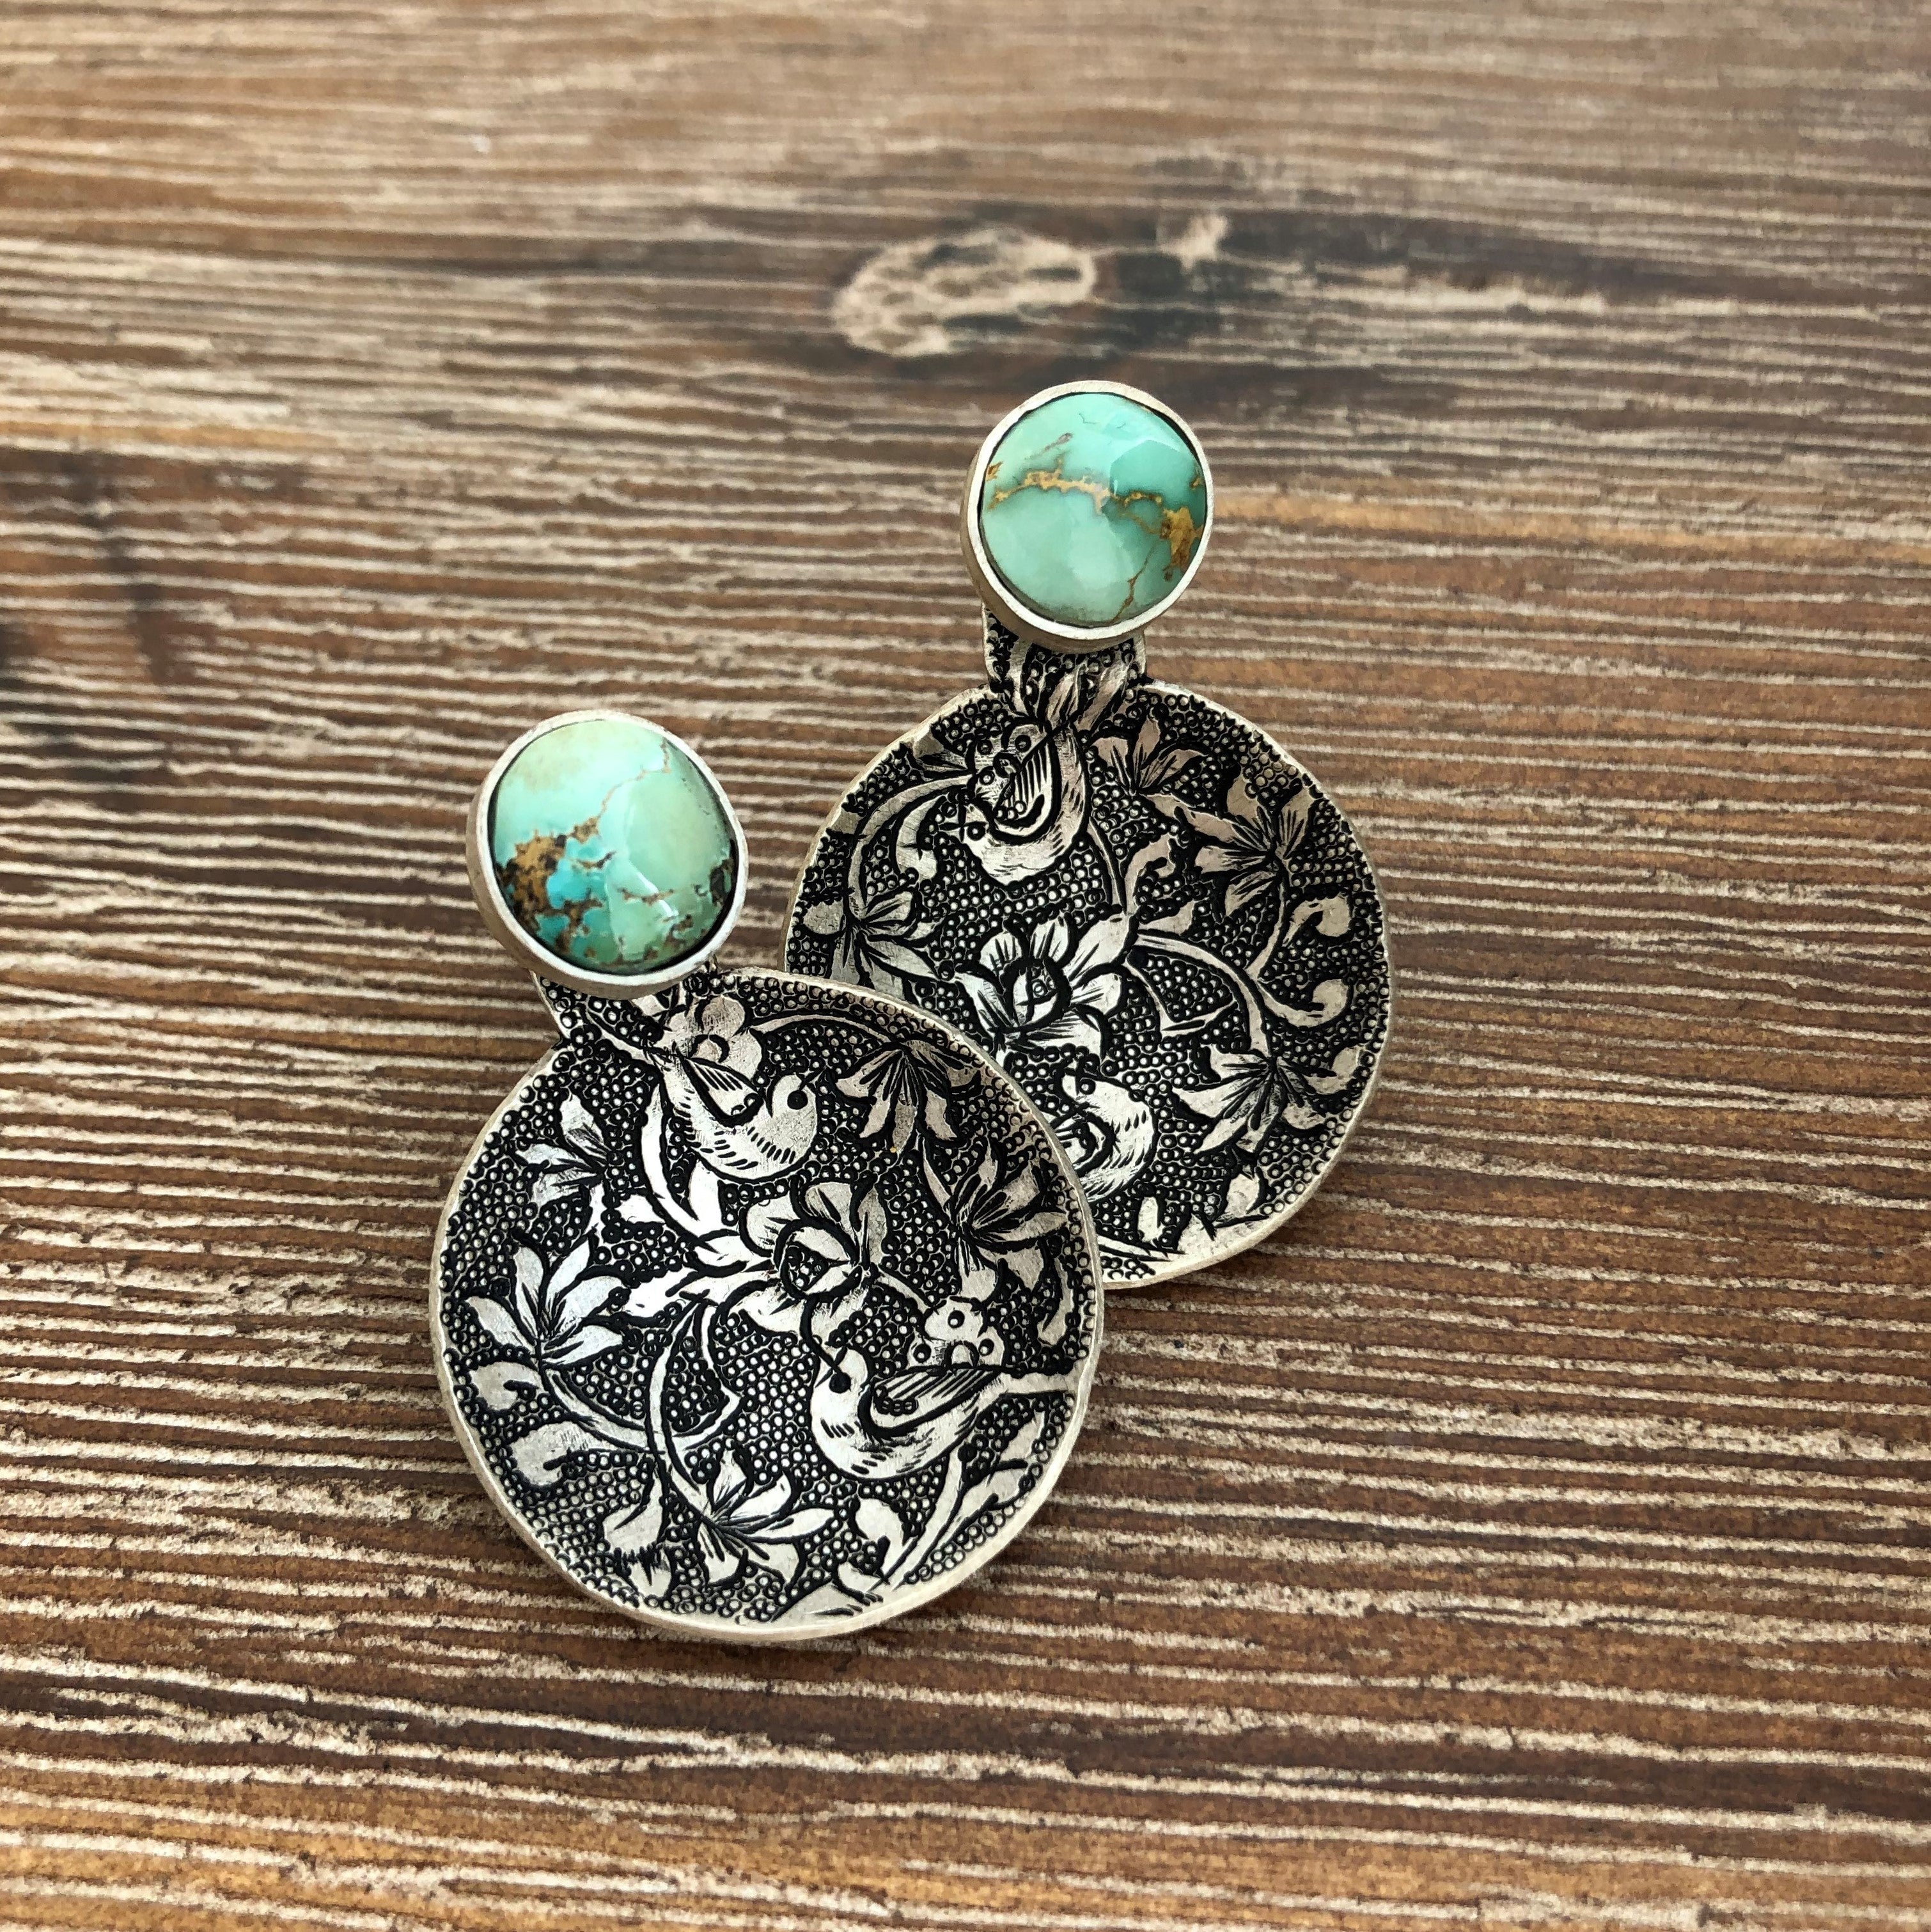 Persian Turquoise Jewelry-Handmade, Flower and Bird Engraved Silver Stud Earrings with Turquoise: Persian Jewelry-AFRA ART GALLERY